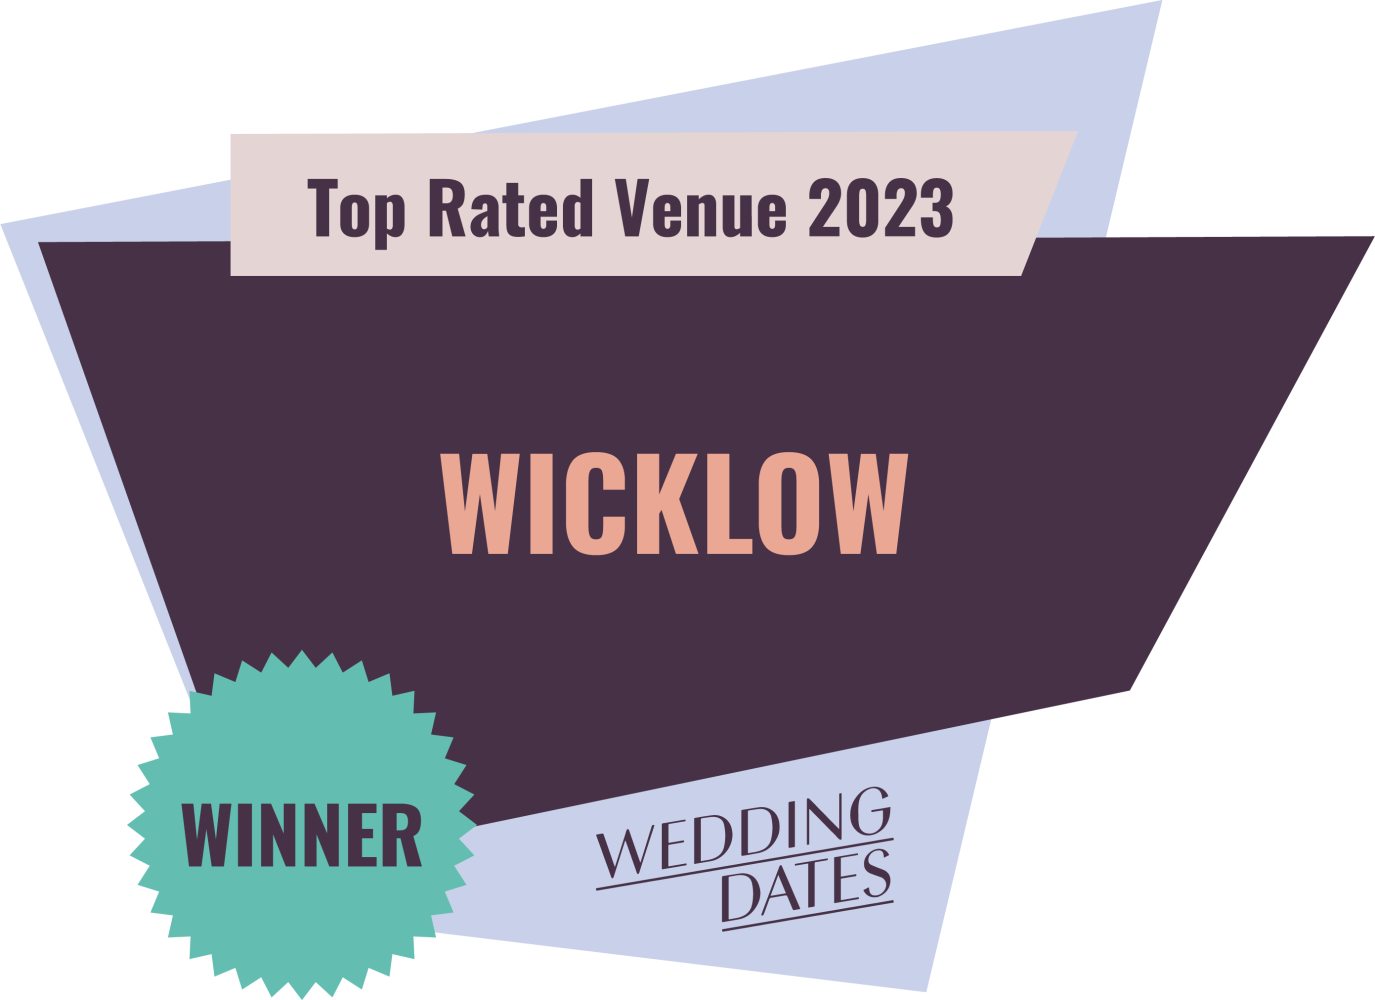 wd awards 2023 ie wicklowpng